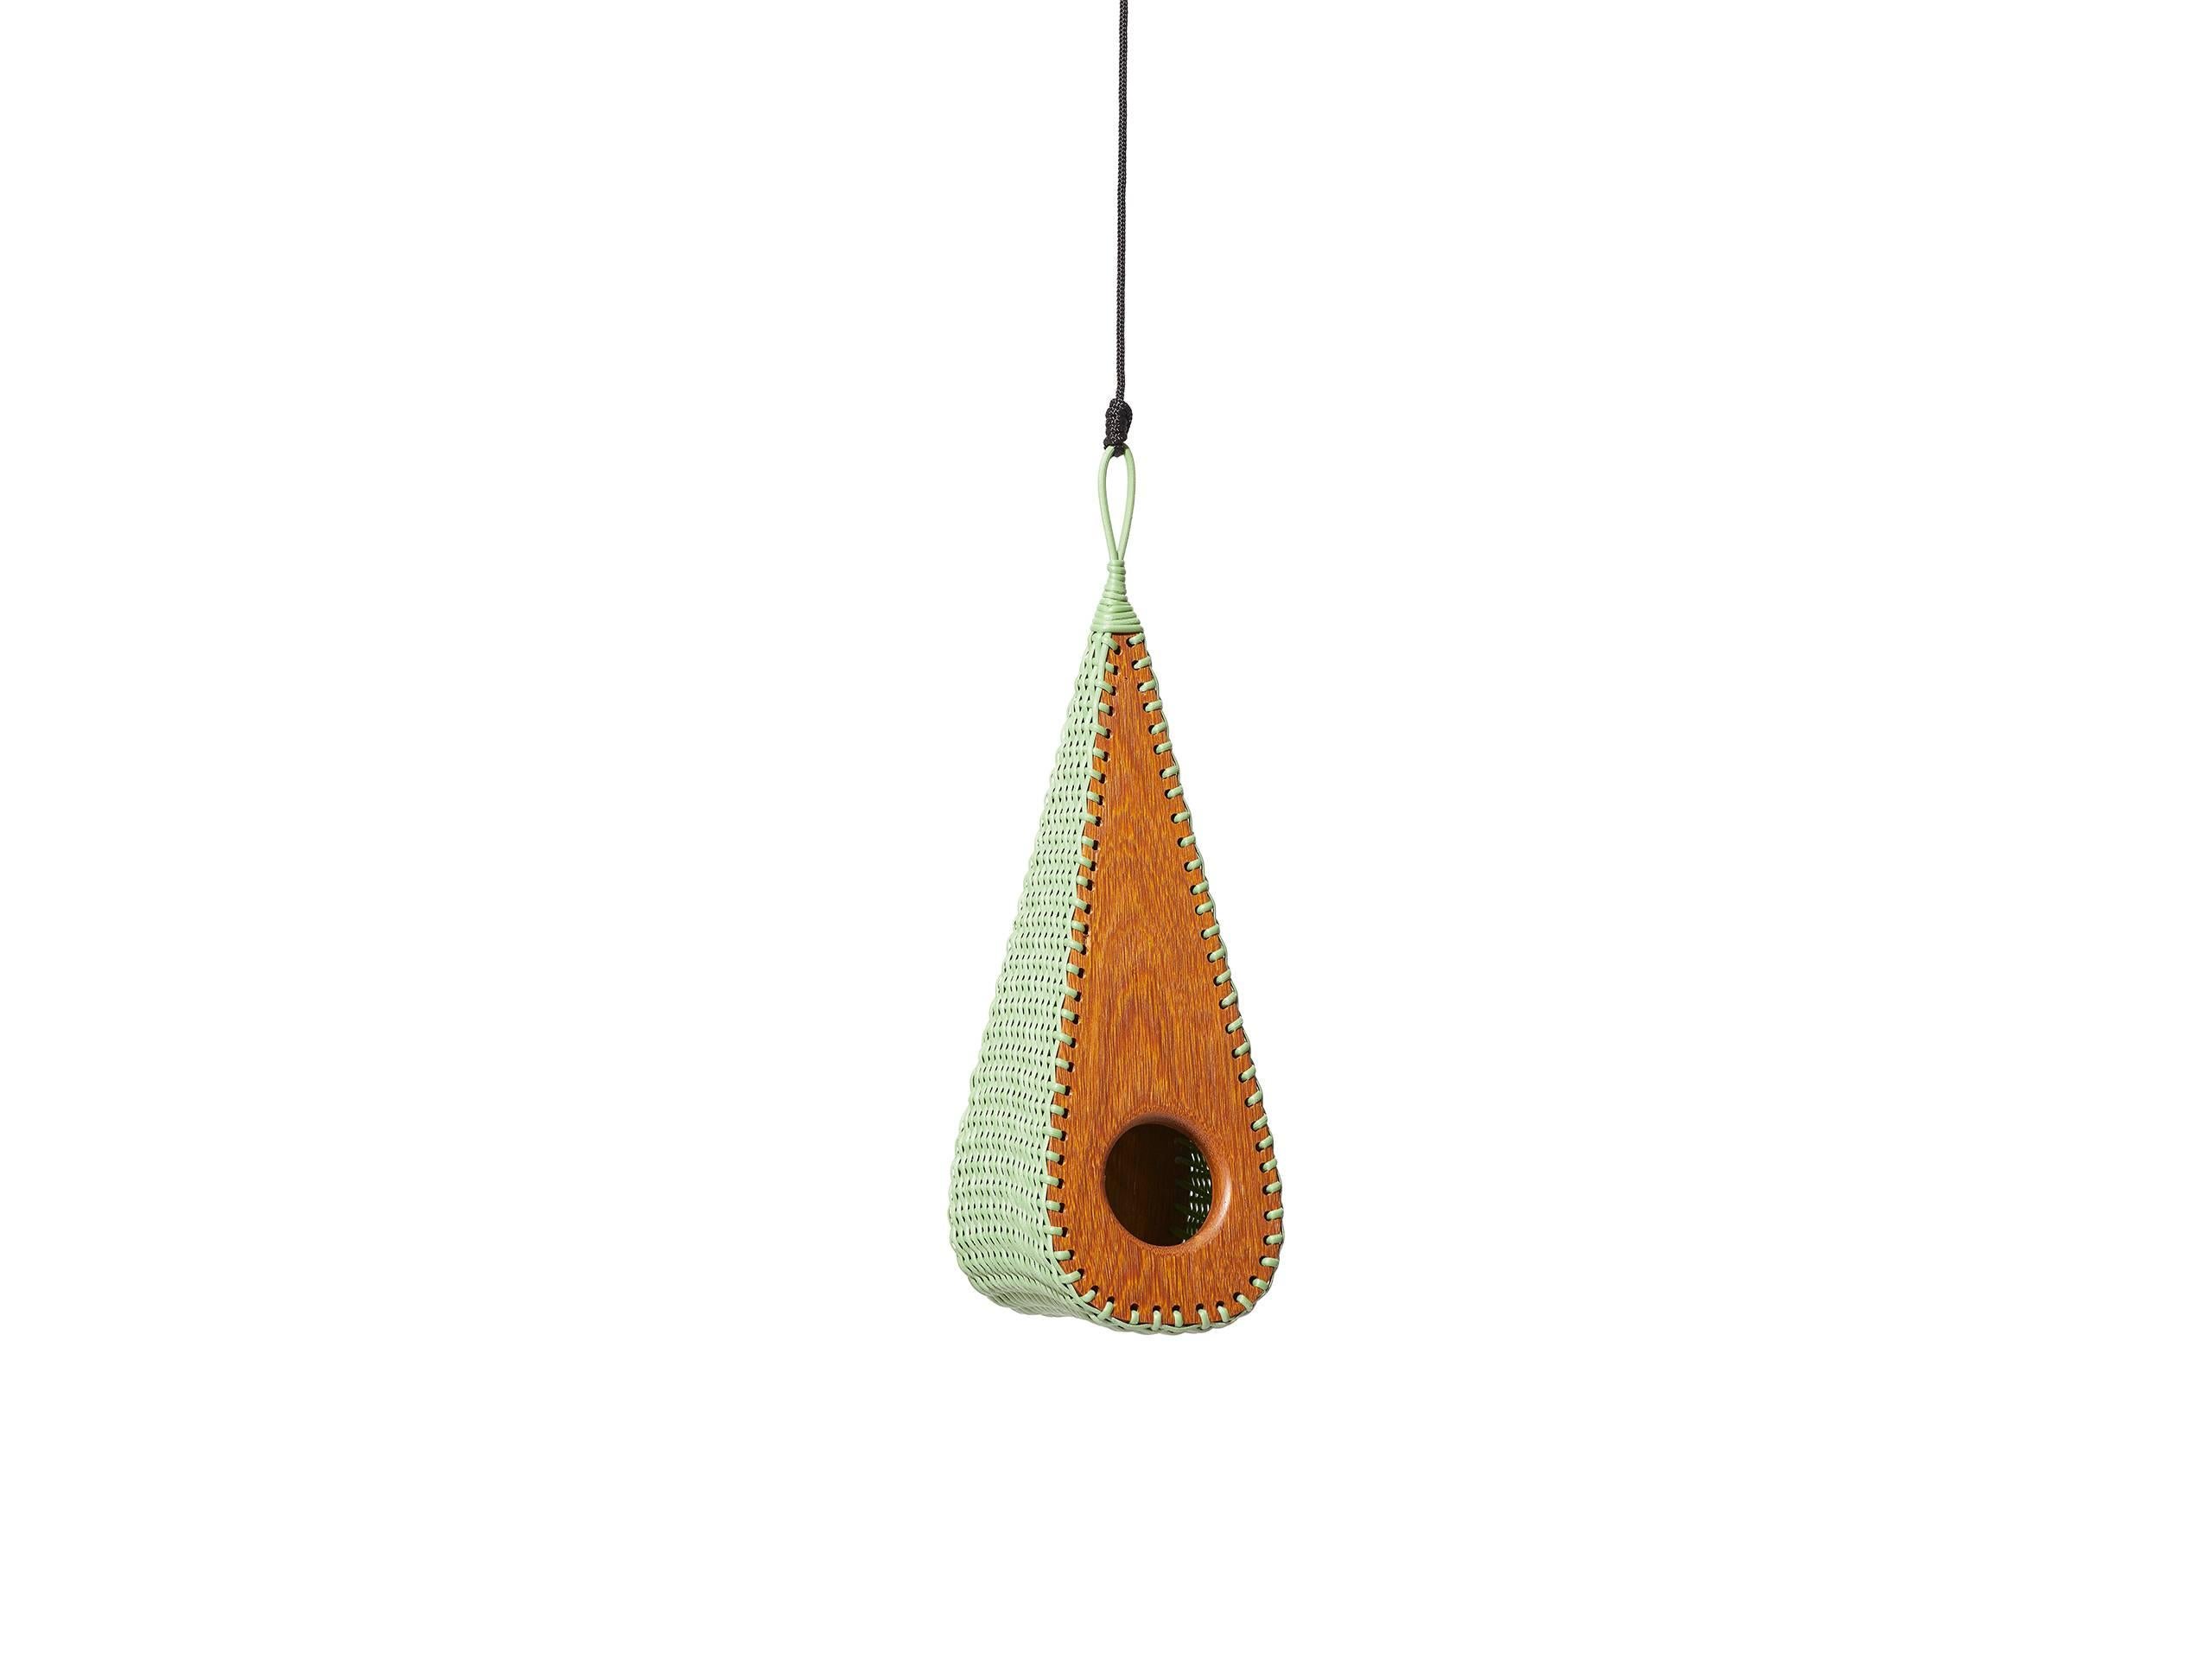 In this first Lattoog project made specifically for birds, it seemed pertinent to take nature as the main source of inspiration. In this case, the shape of a waterdrop was the perfect answer to the proposed use: A hanging birdhouse to be used